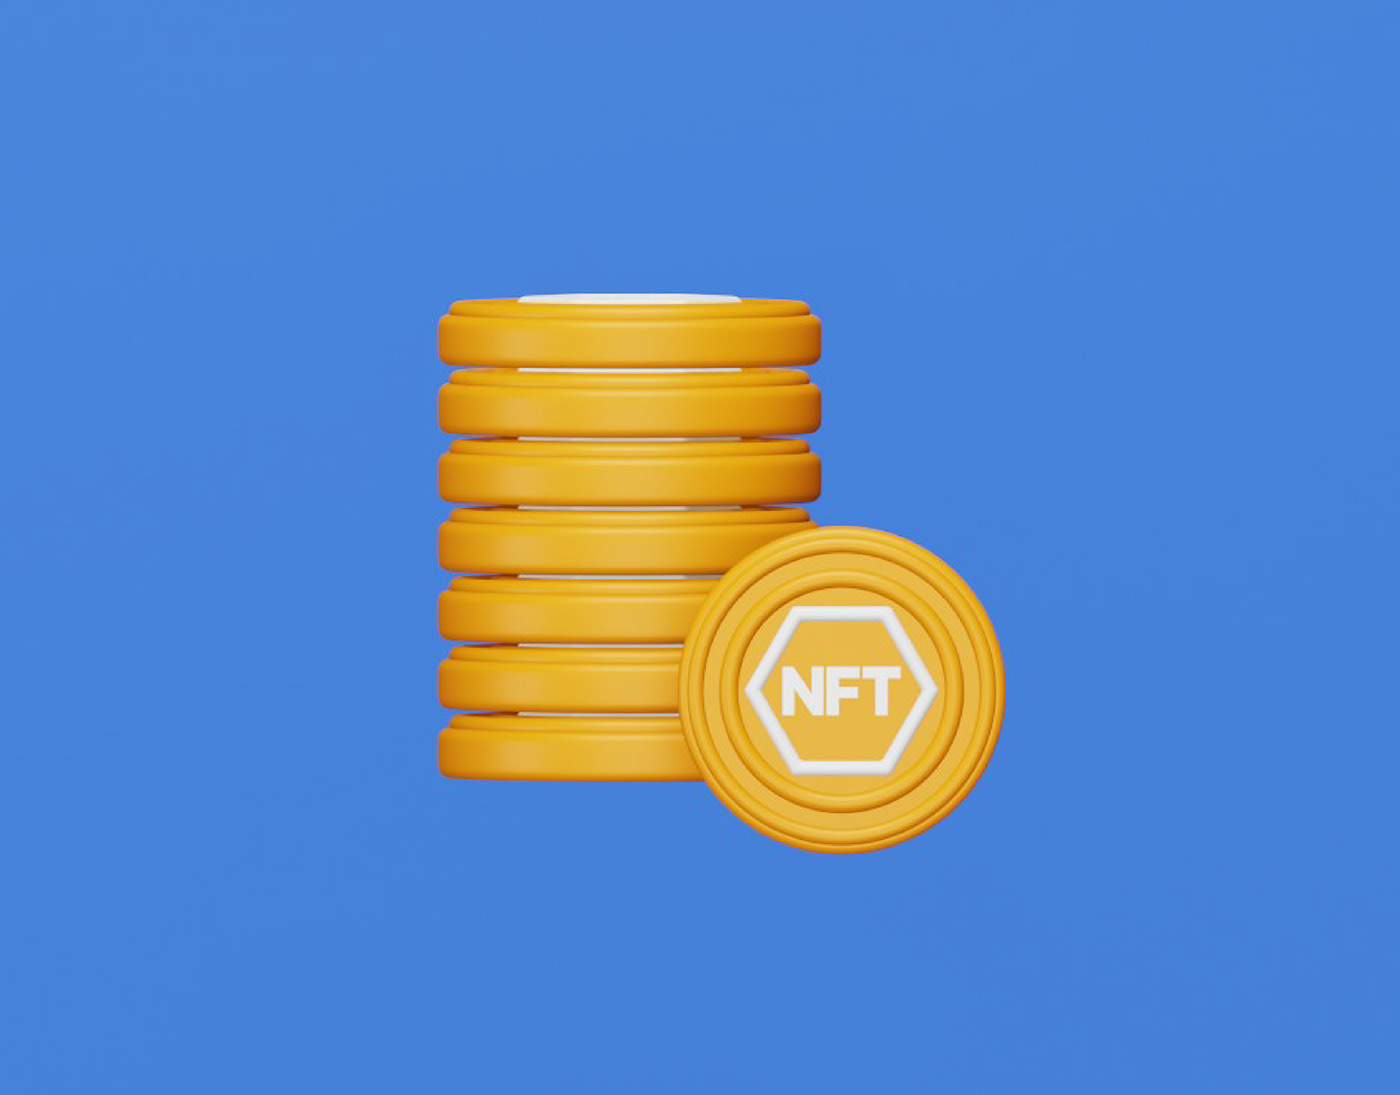 nft tokens blockchain cryptocurrency digital finance blender 3d coins design non-fungible